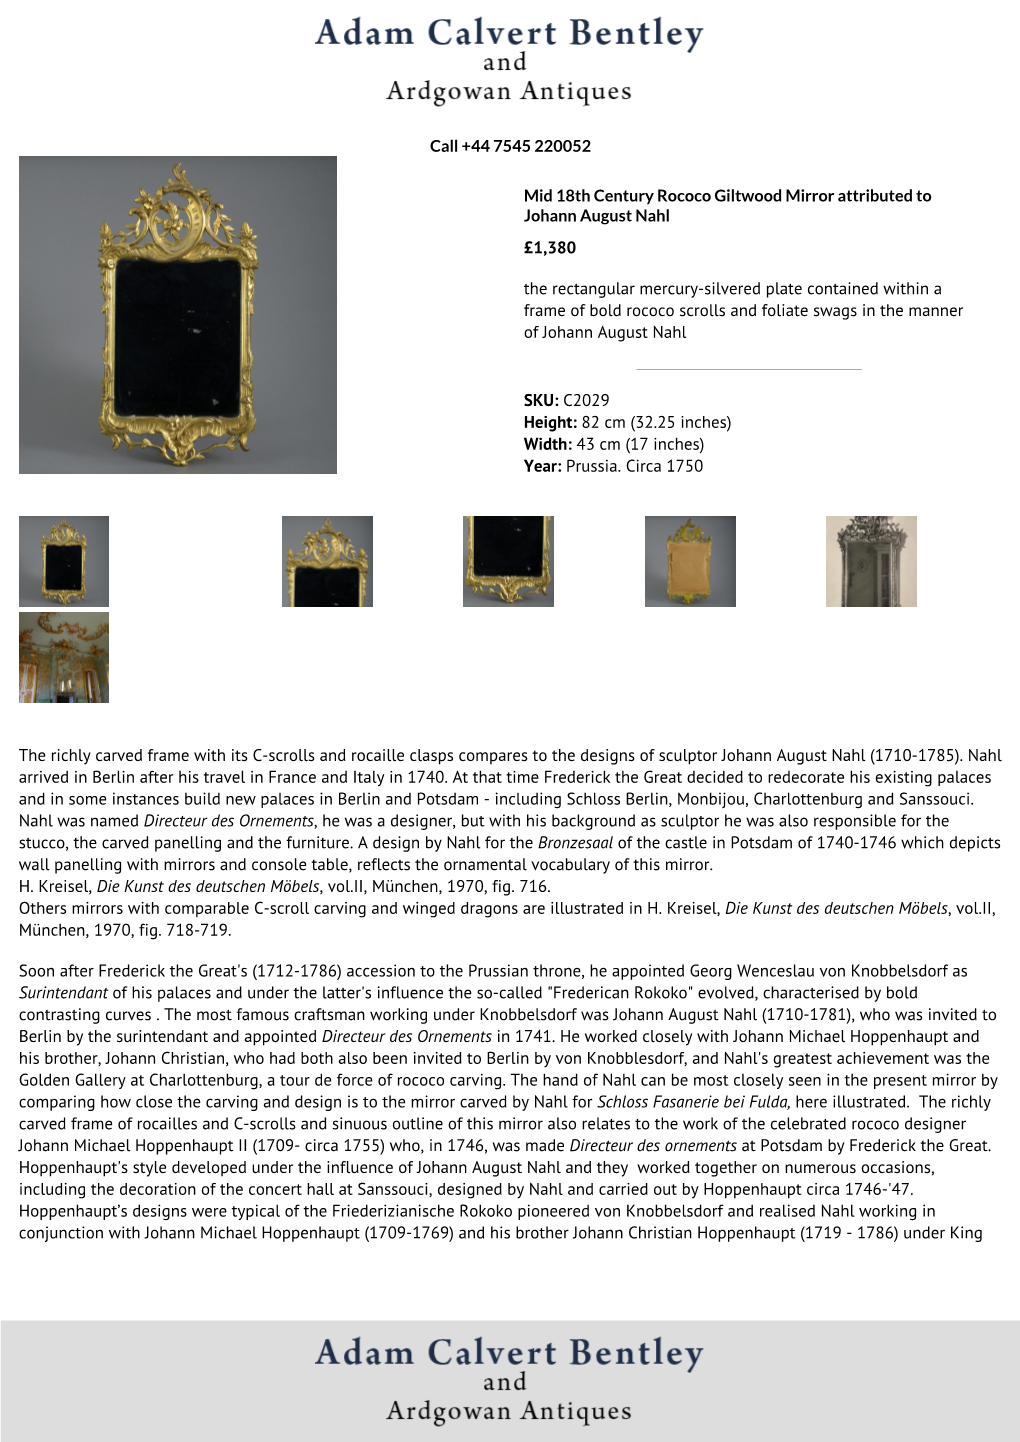 £1,380 the Rectangular Mercury-Silvered Plate Contained